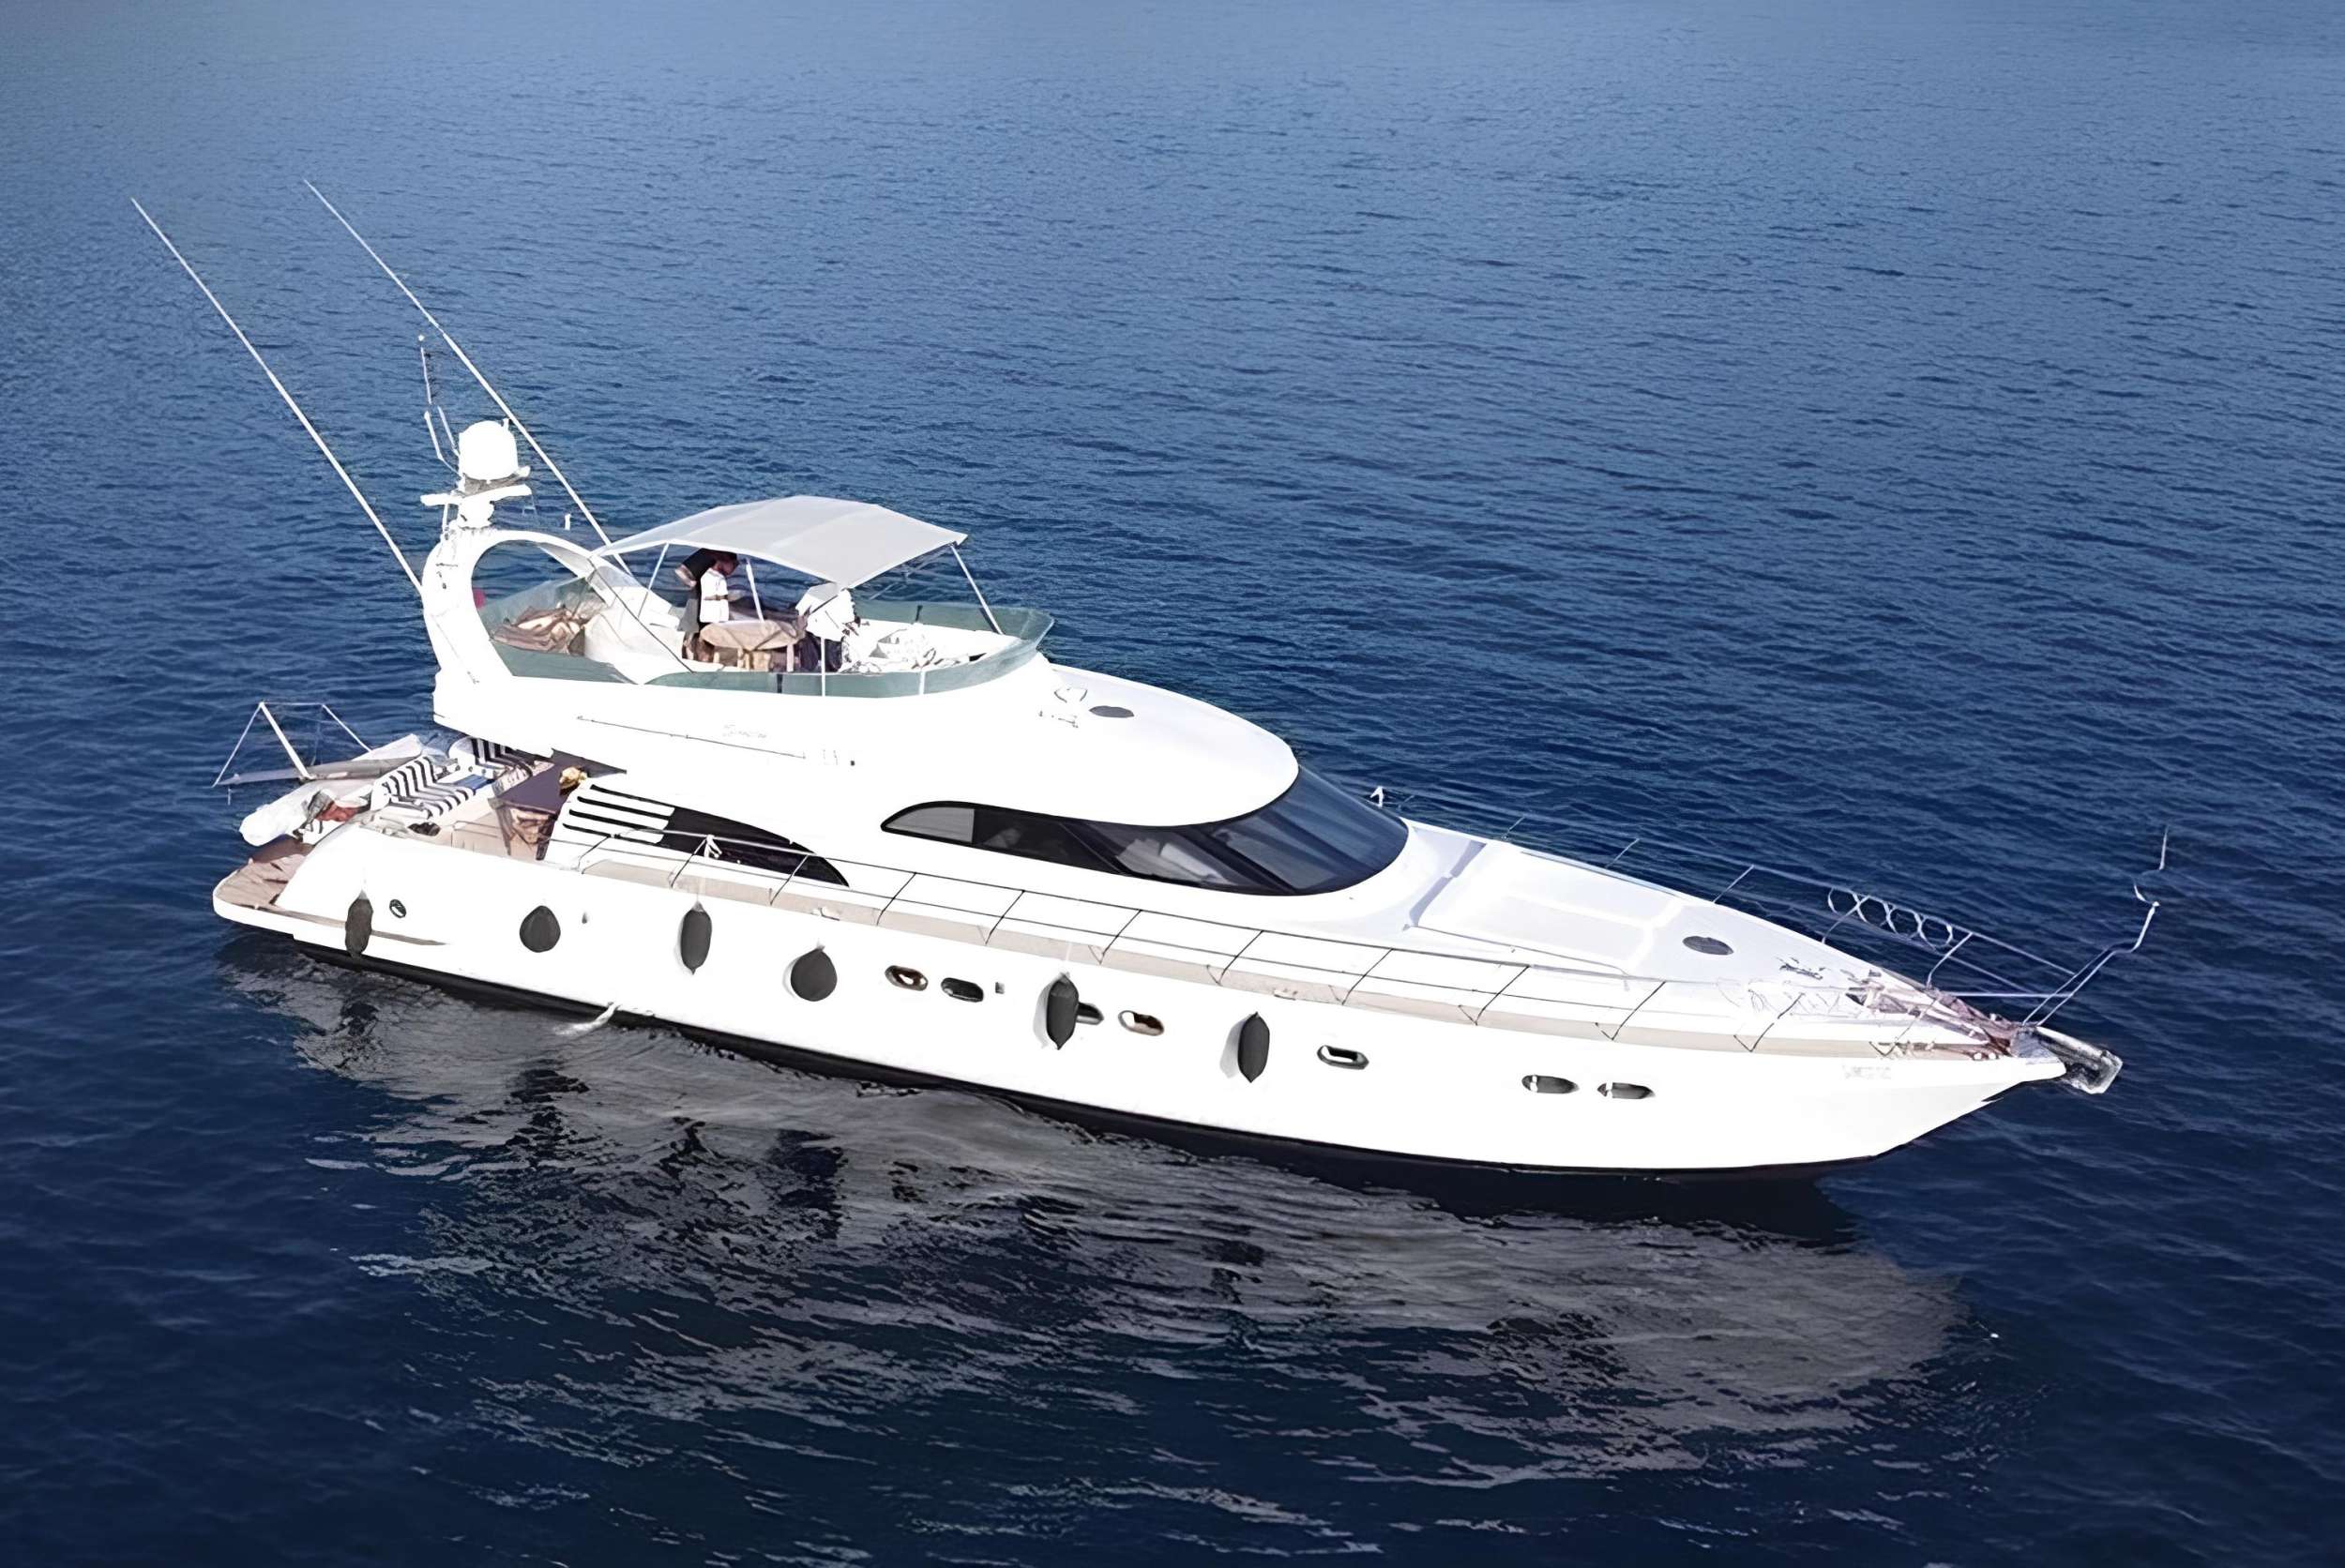 SIROCCO - Yacht Charter Istanbul & Boat hire in Turkey 1